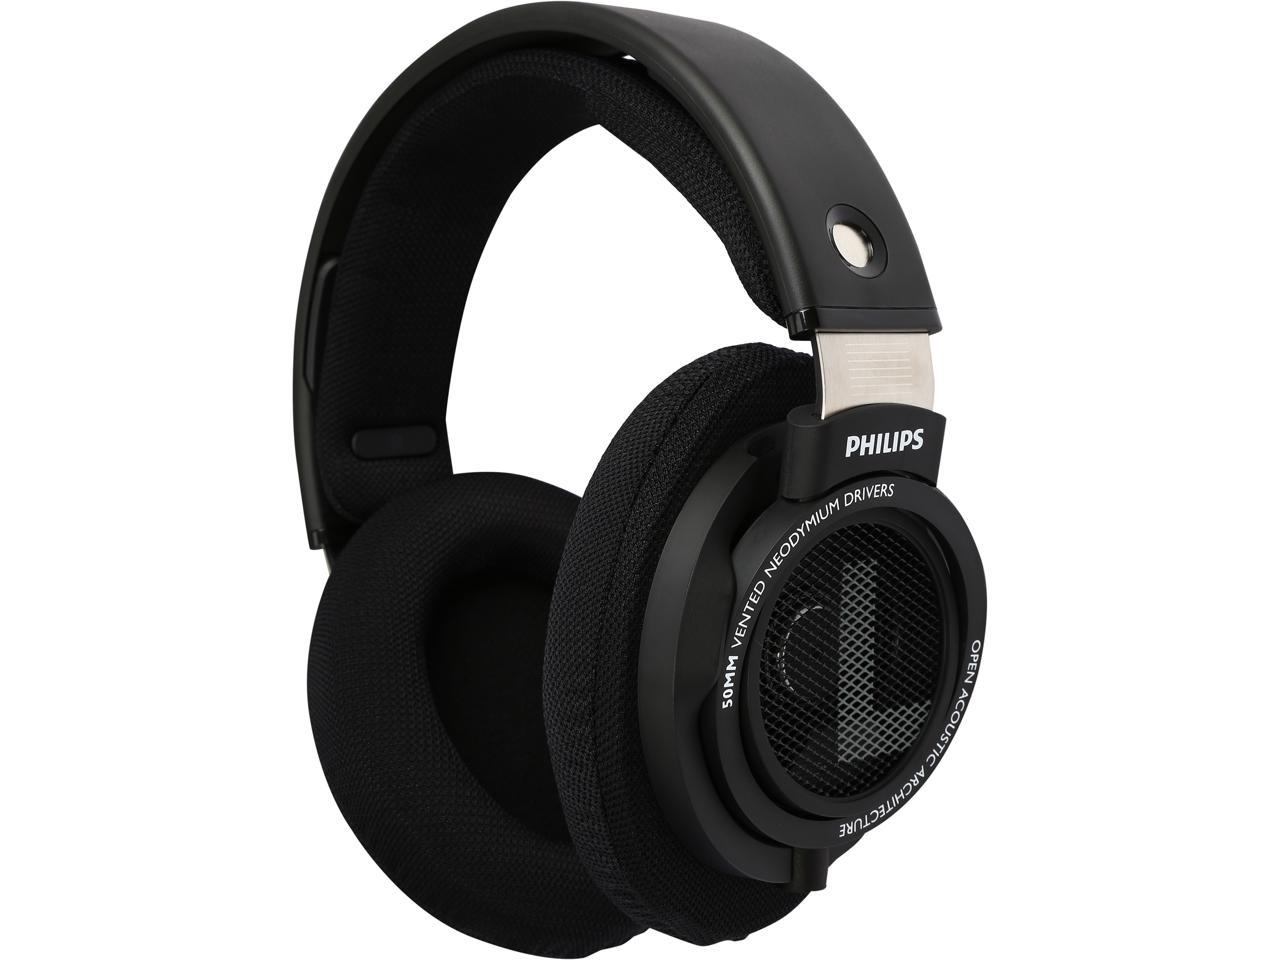 Philips Performance SHP9500 Over-Ear Open-Air Headphones - EXCLUSIVE - Black - Newegg.com